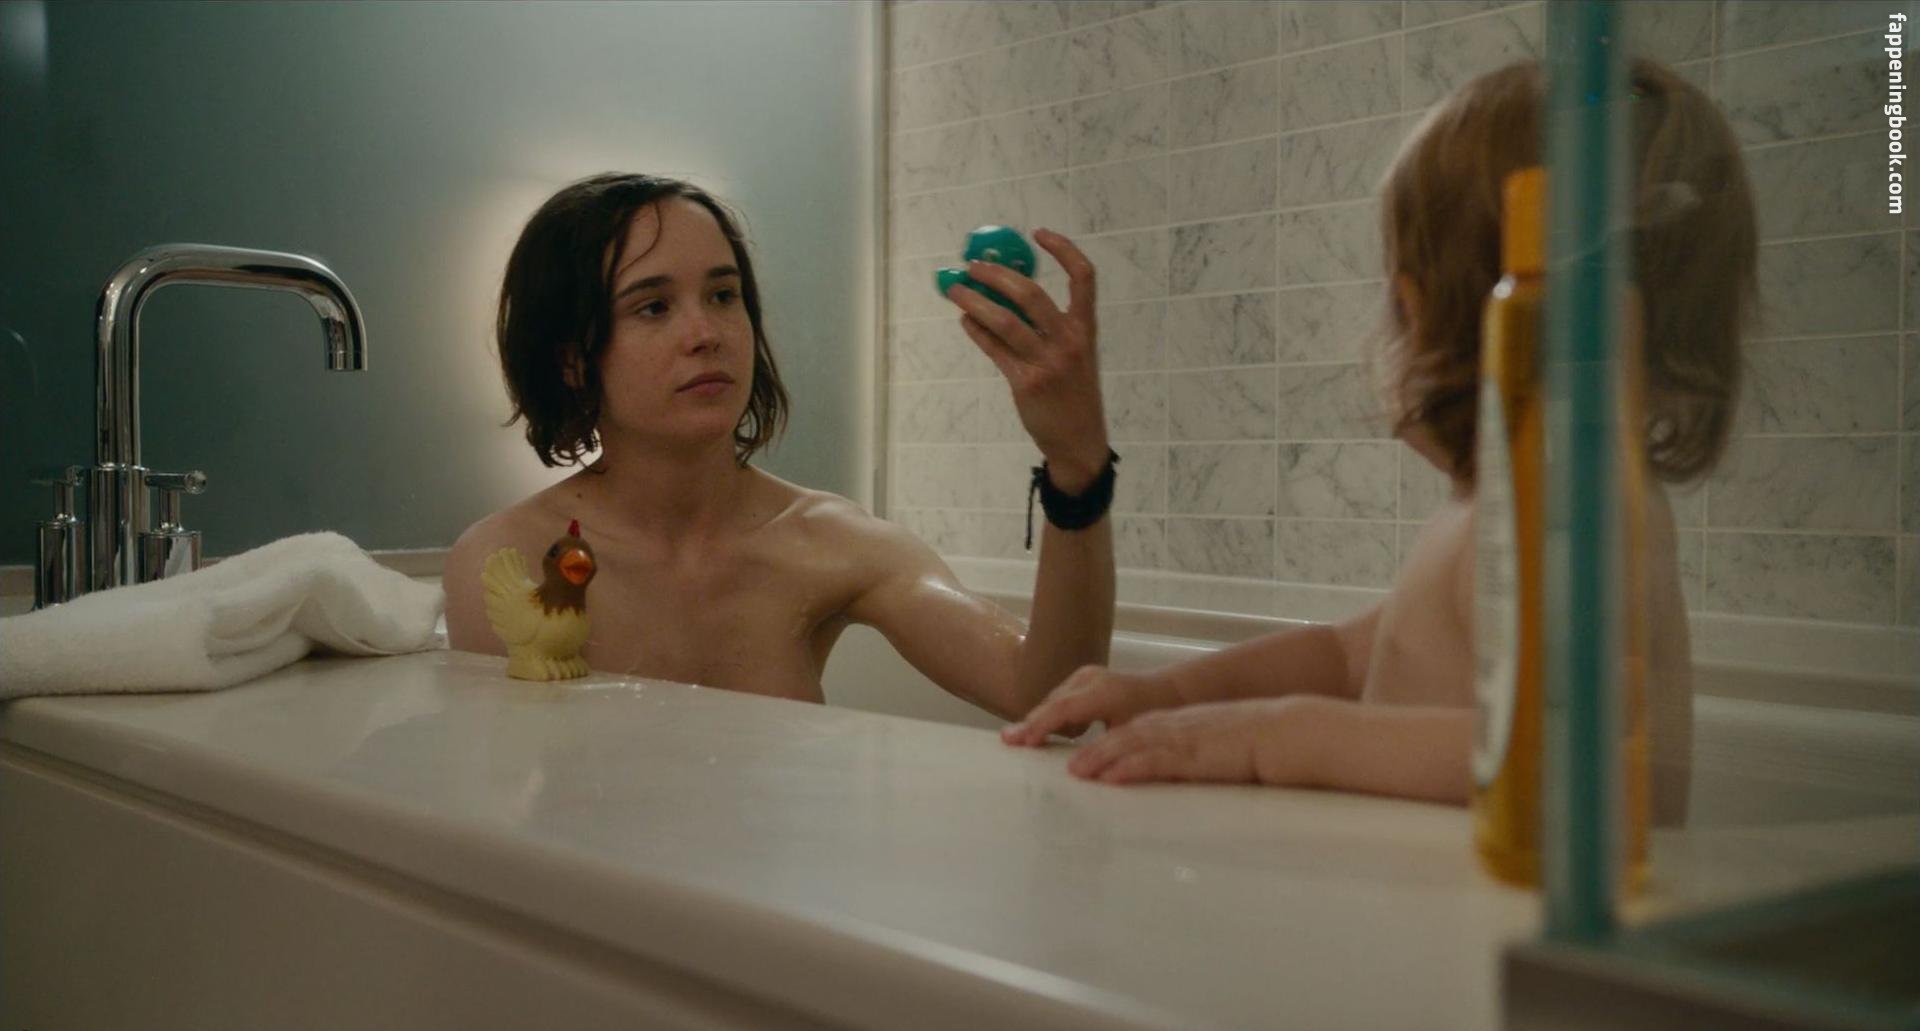 Ellen Page Nude, The Fappening - Photo #162879 - FappeningBook.